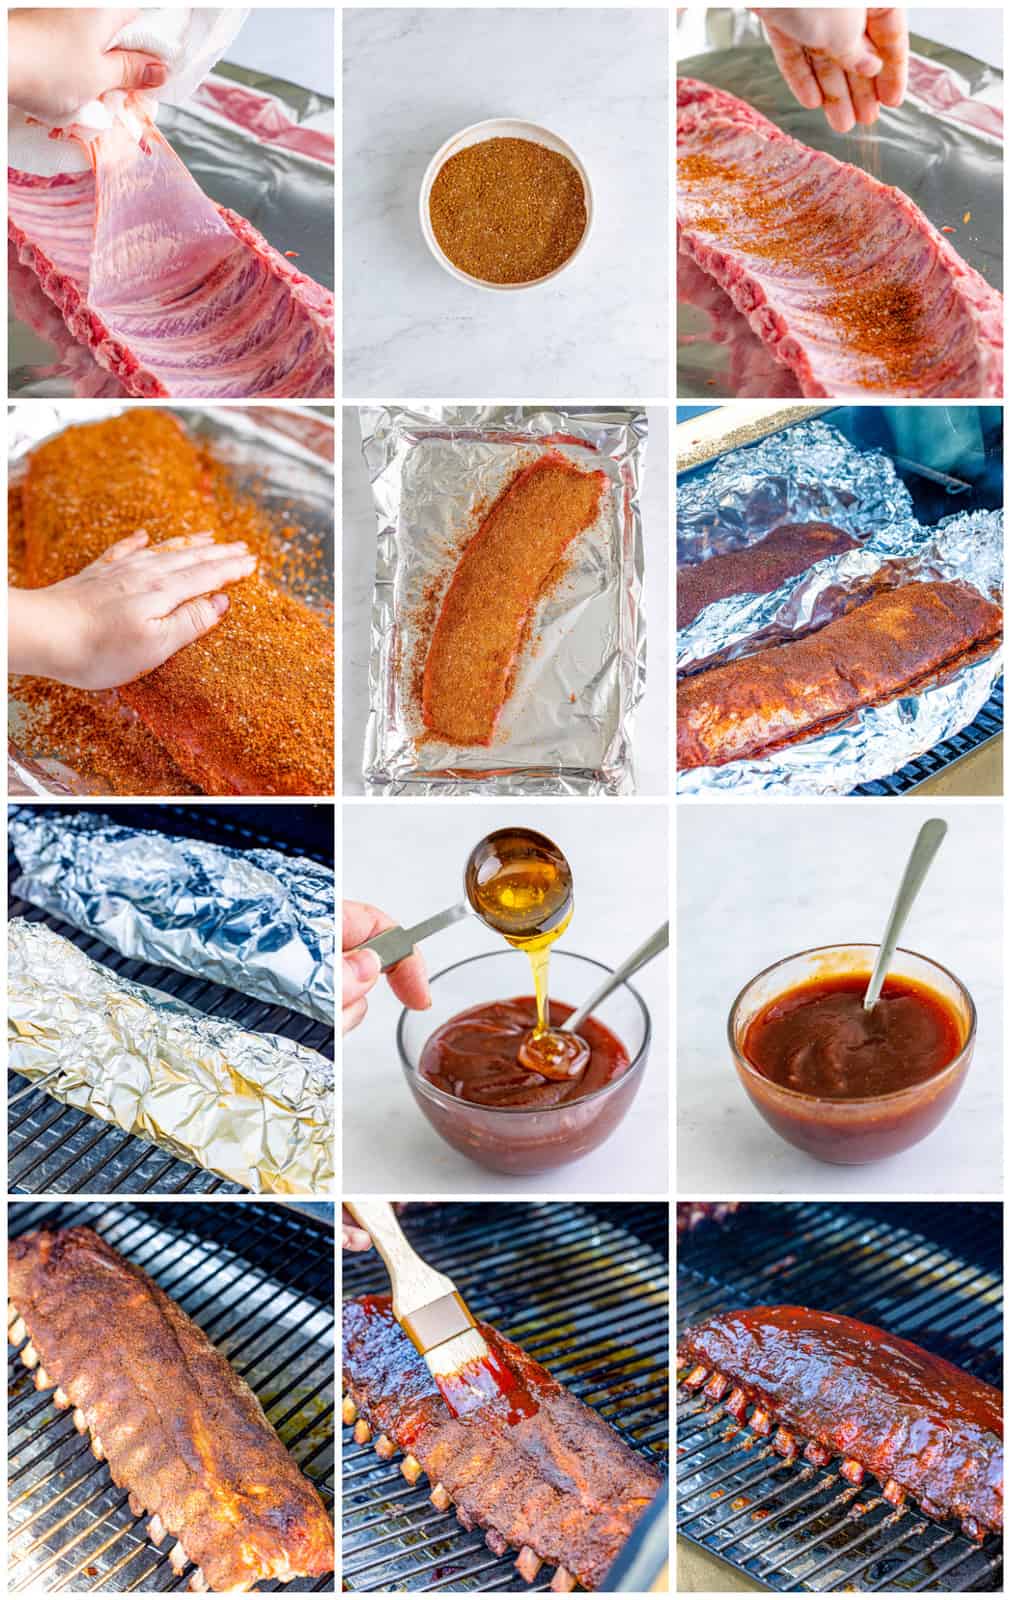 Step by step photos on how to make Smoked Ribs.